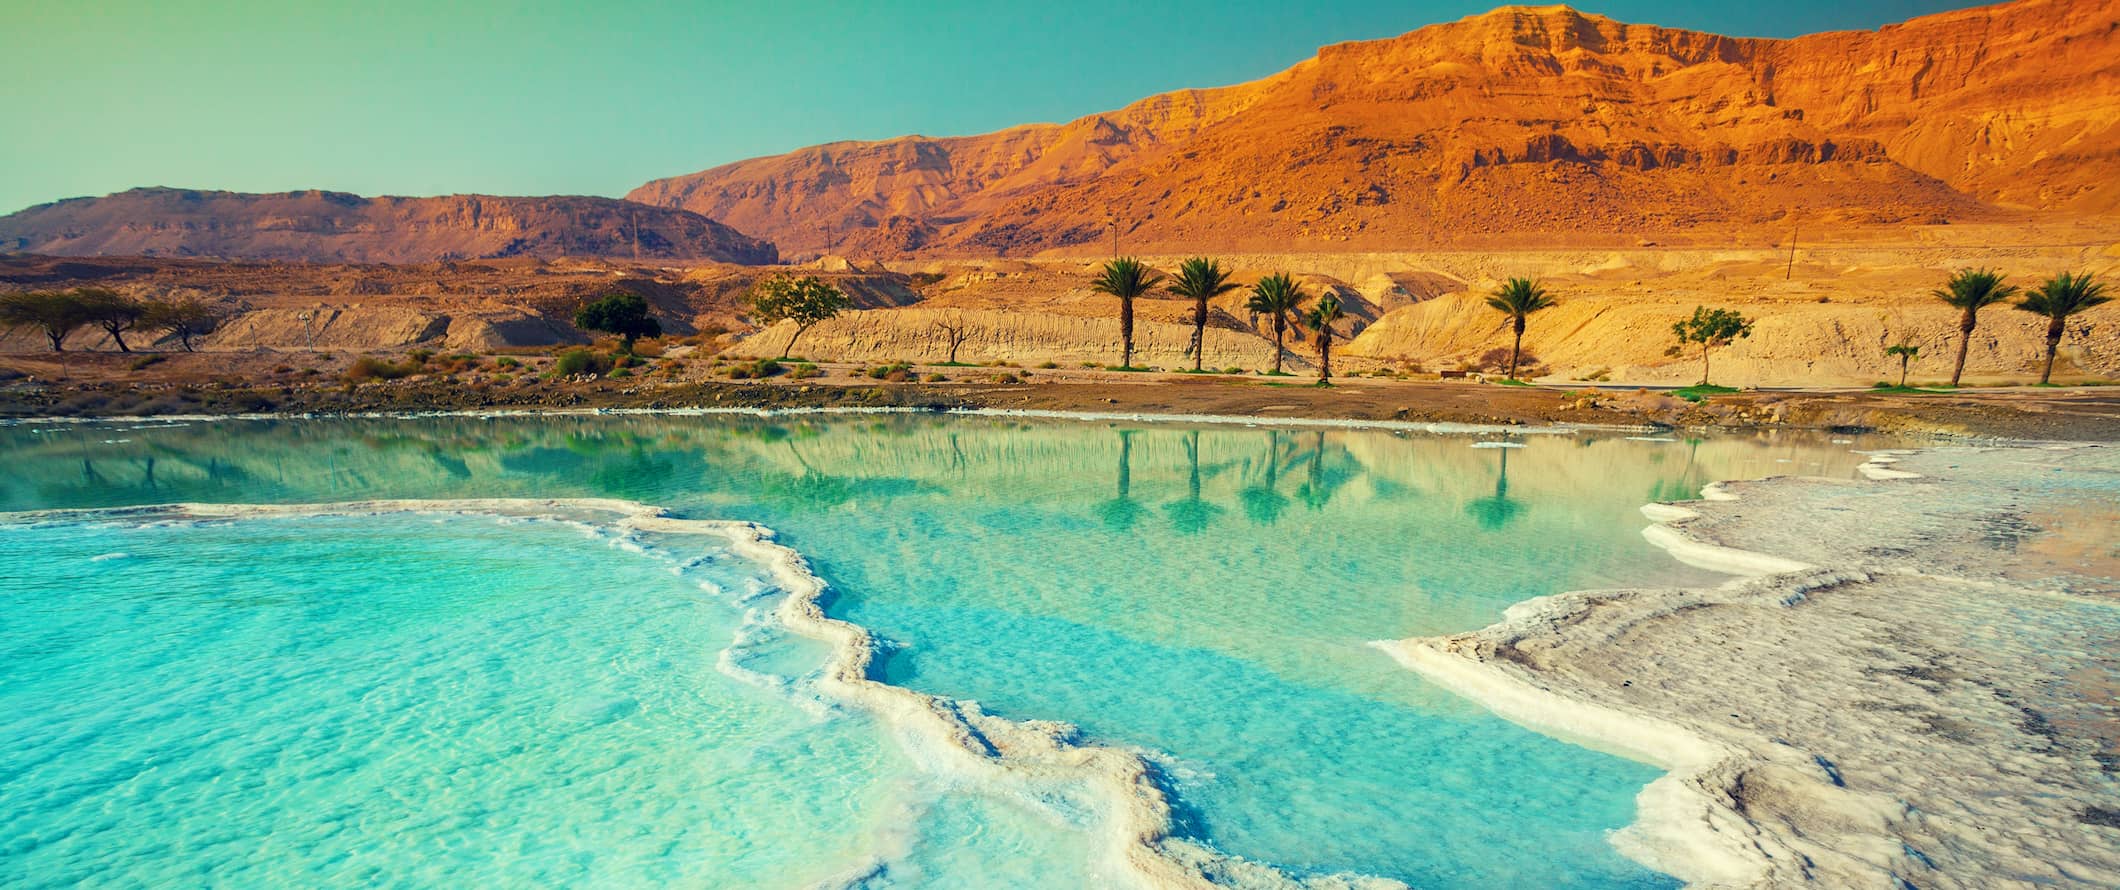 The calm, clear, and salty waters of the Dead Sea in hot, sunny Jordan